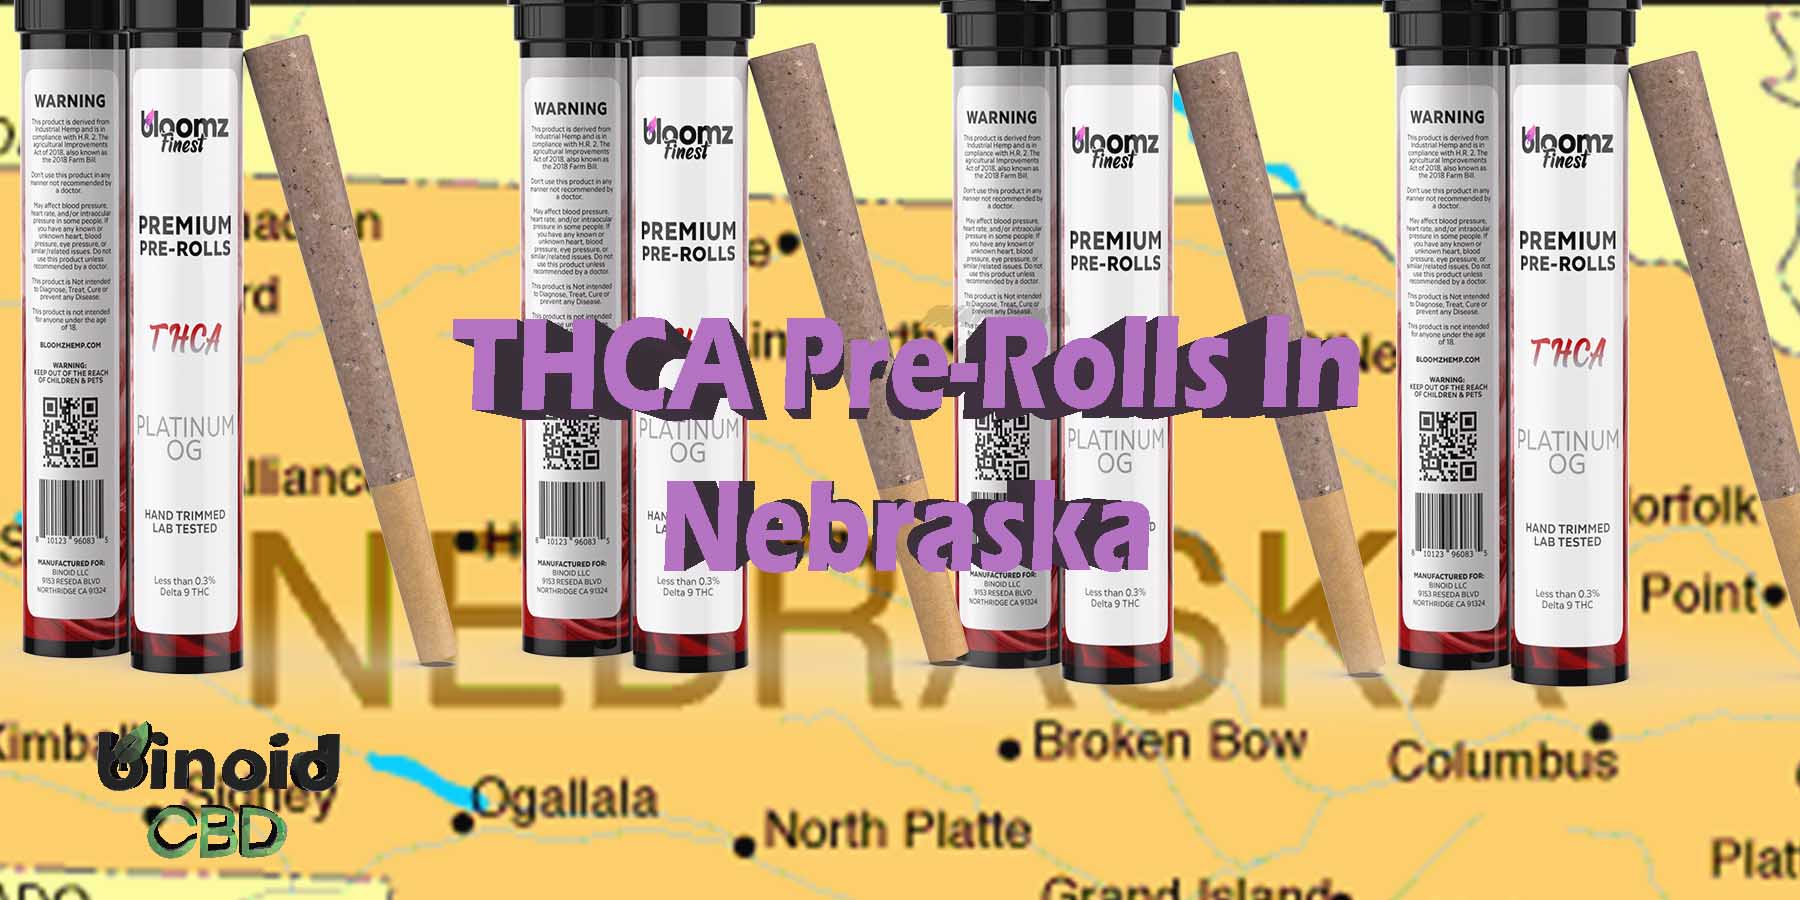 THCA Pre-Rolls In Nebraska THCA Hemp Flower Indica Where To Get Near Me Best Place Lowest Price Coupon Discount Strongest Brand Bloomz